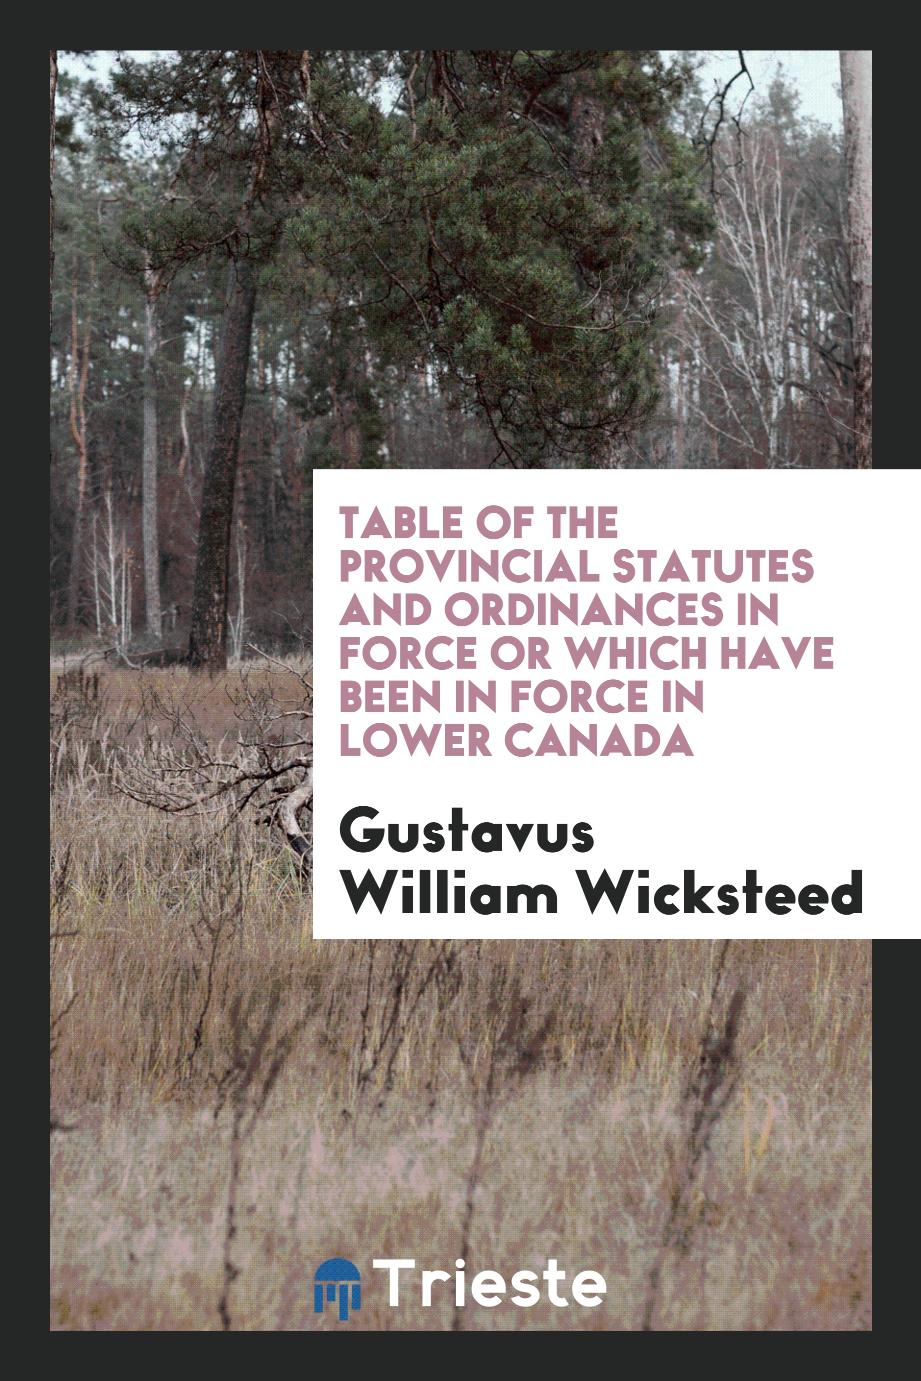 Table of the Provincial Statutes and Ordinances in Force or Which Have Been in Force in Lower Canada